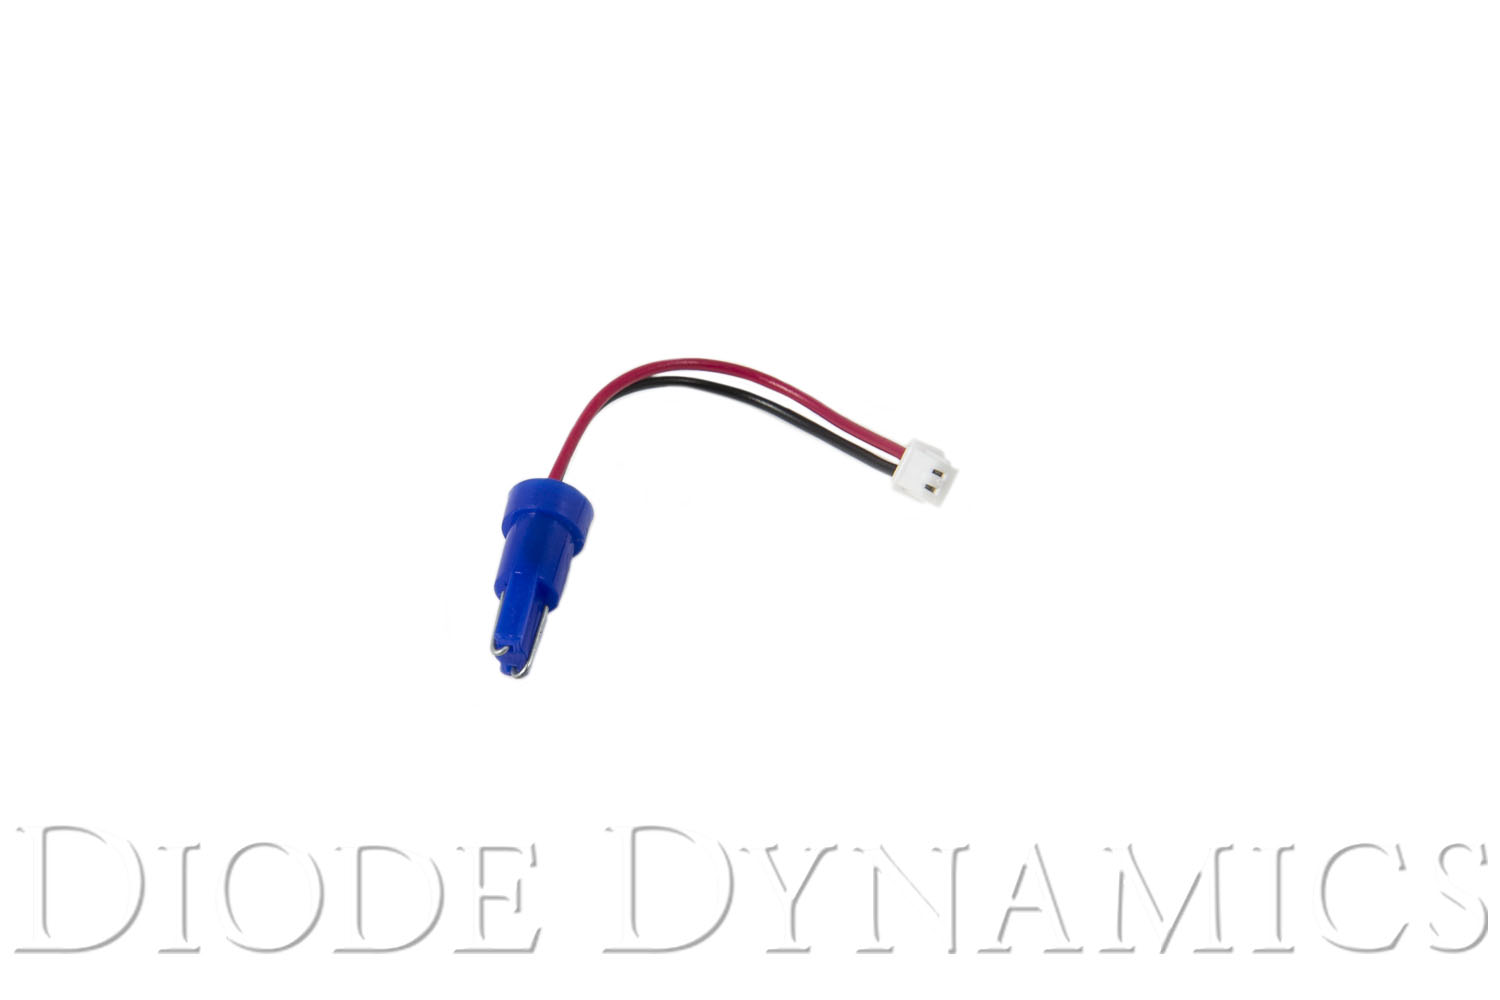 74-size Bulb Adapter | Diode Dynamics 